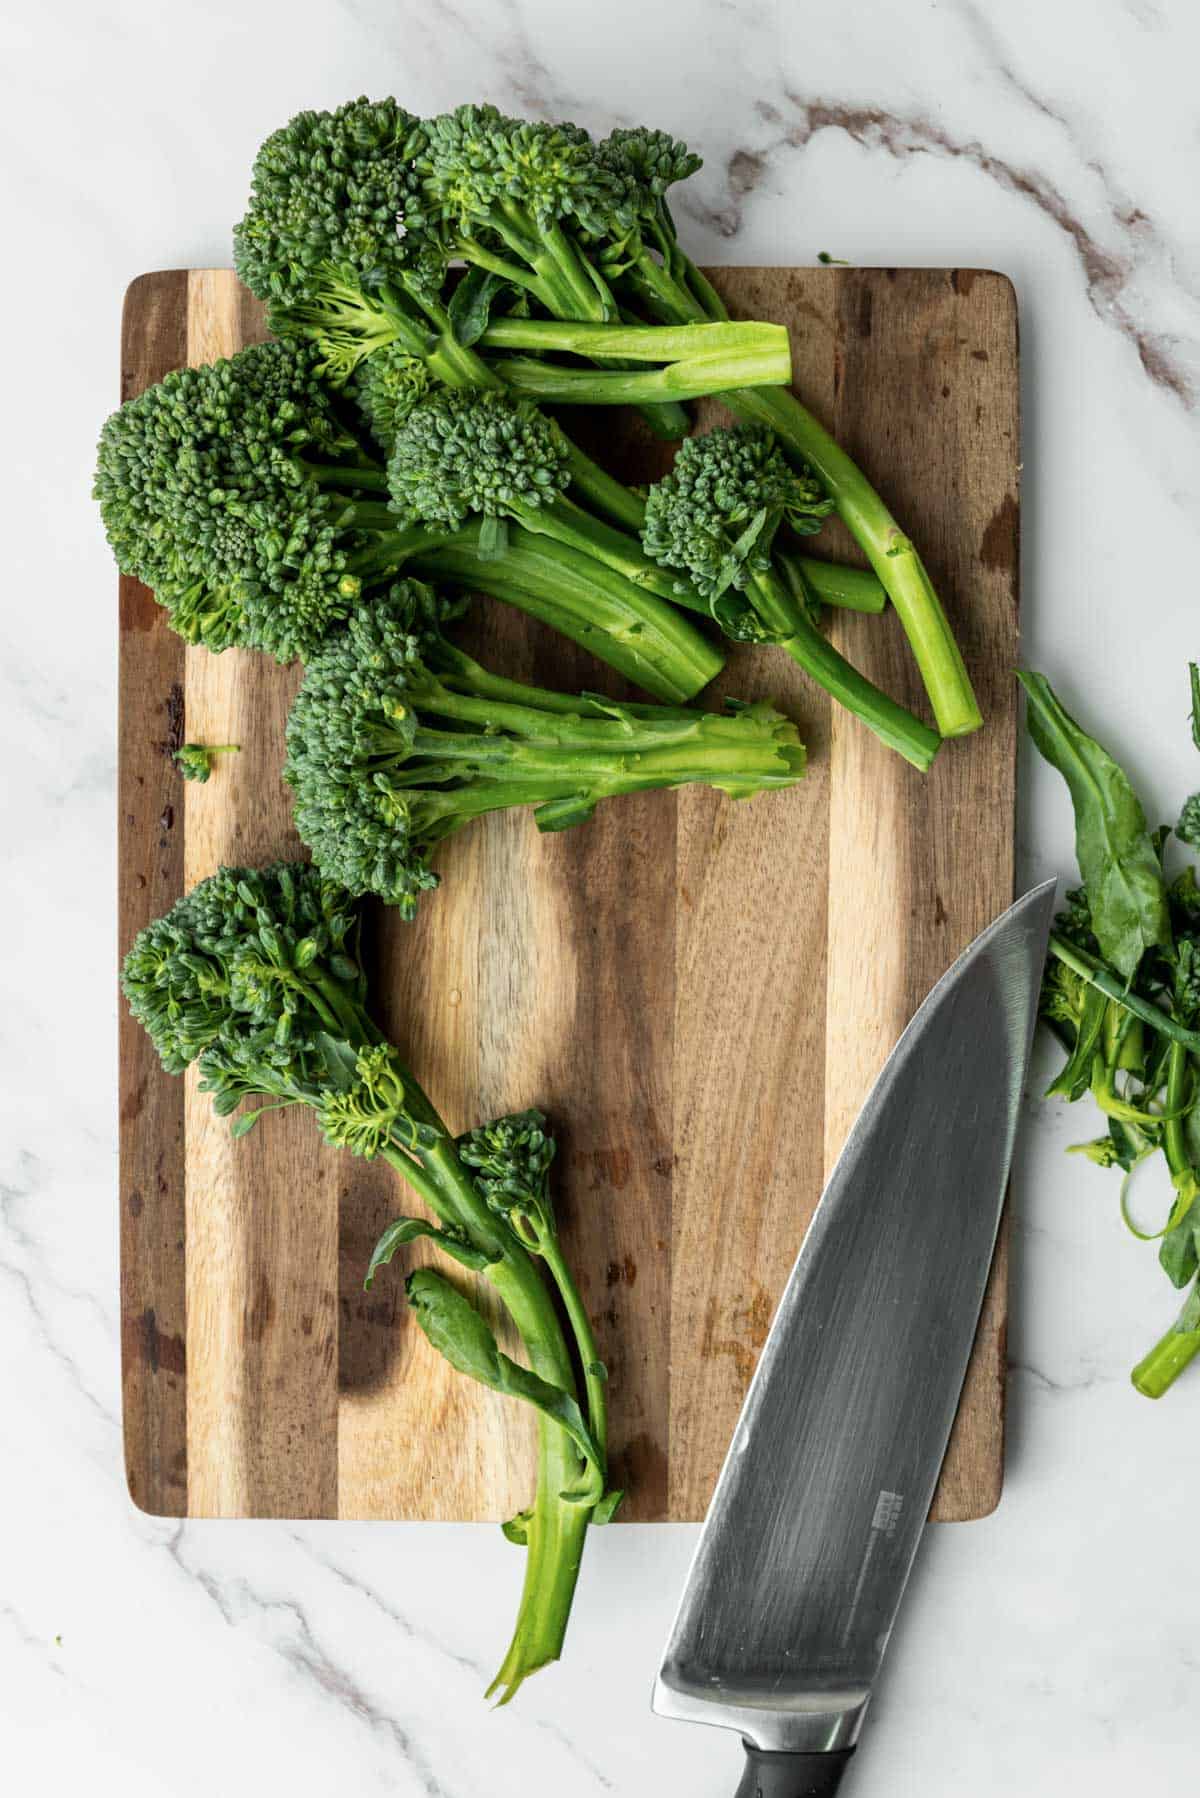 A large knife and broccolini resting on a wooden cutting board.